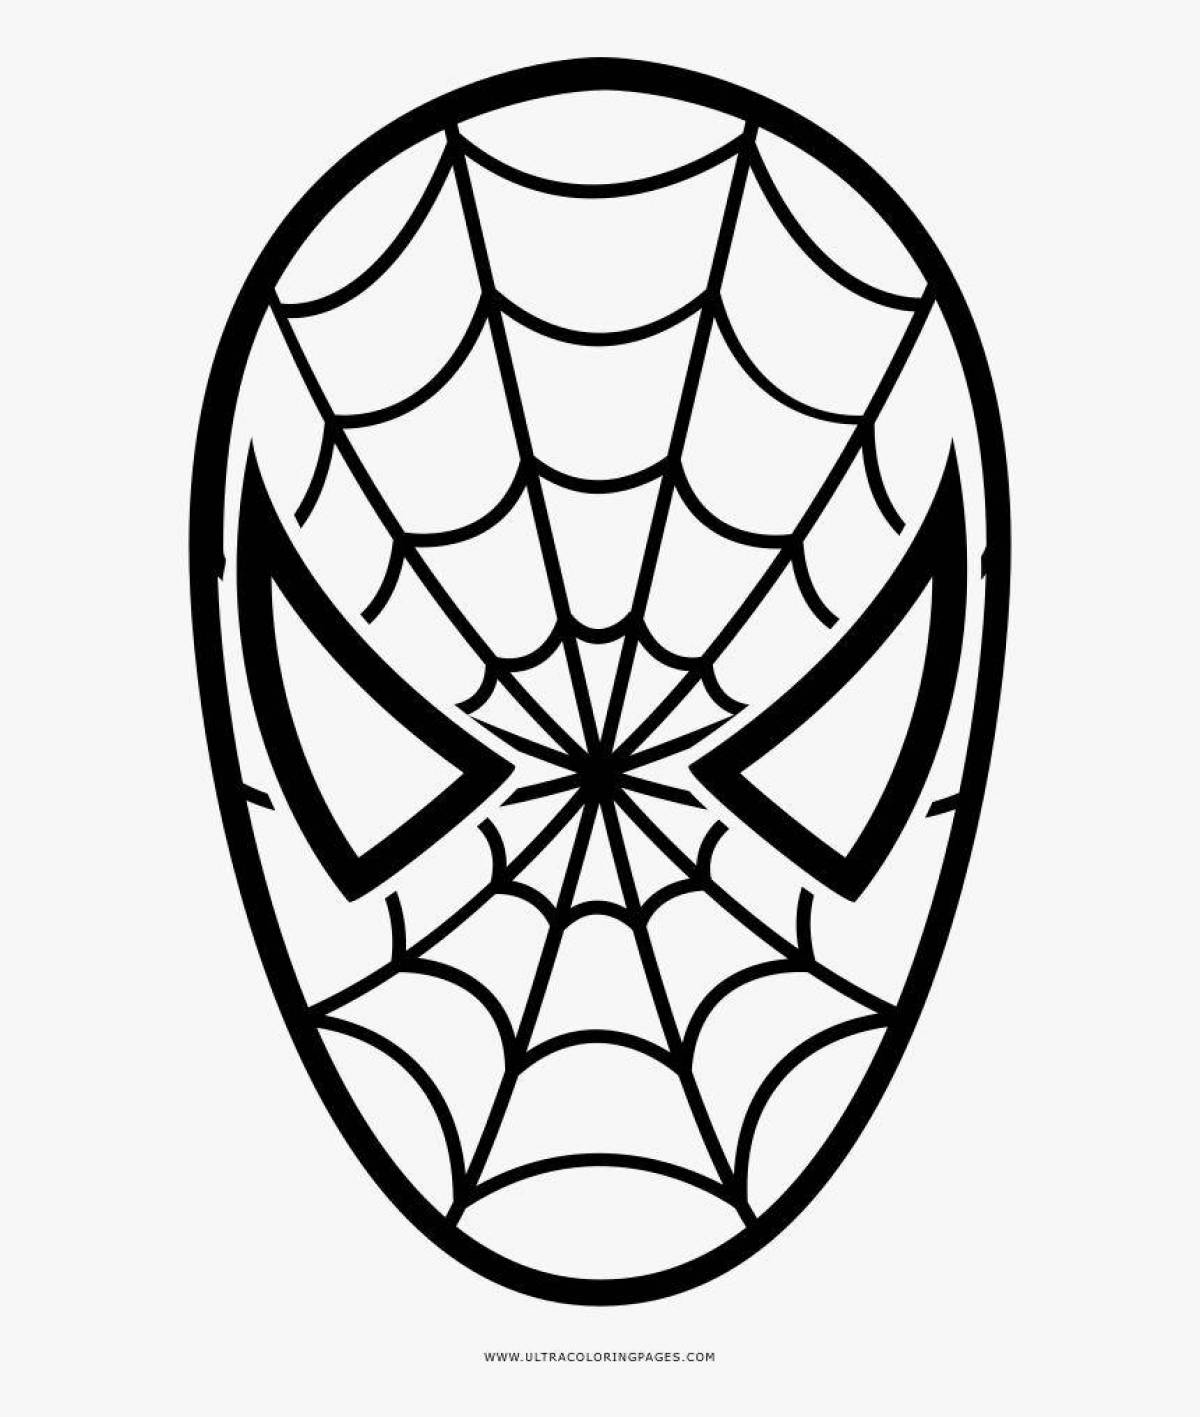 Spiderman's colorful mask coloring page